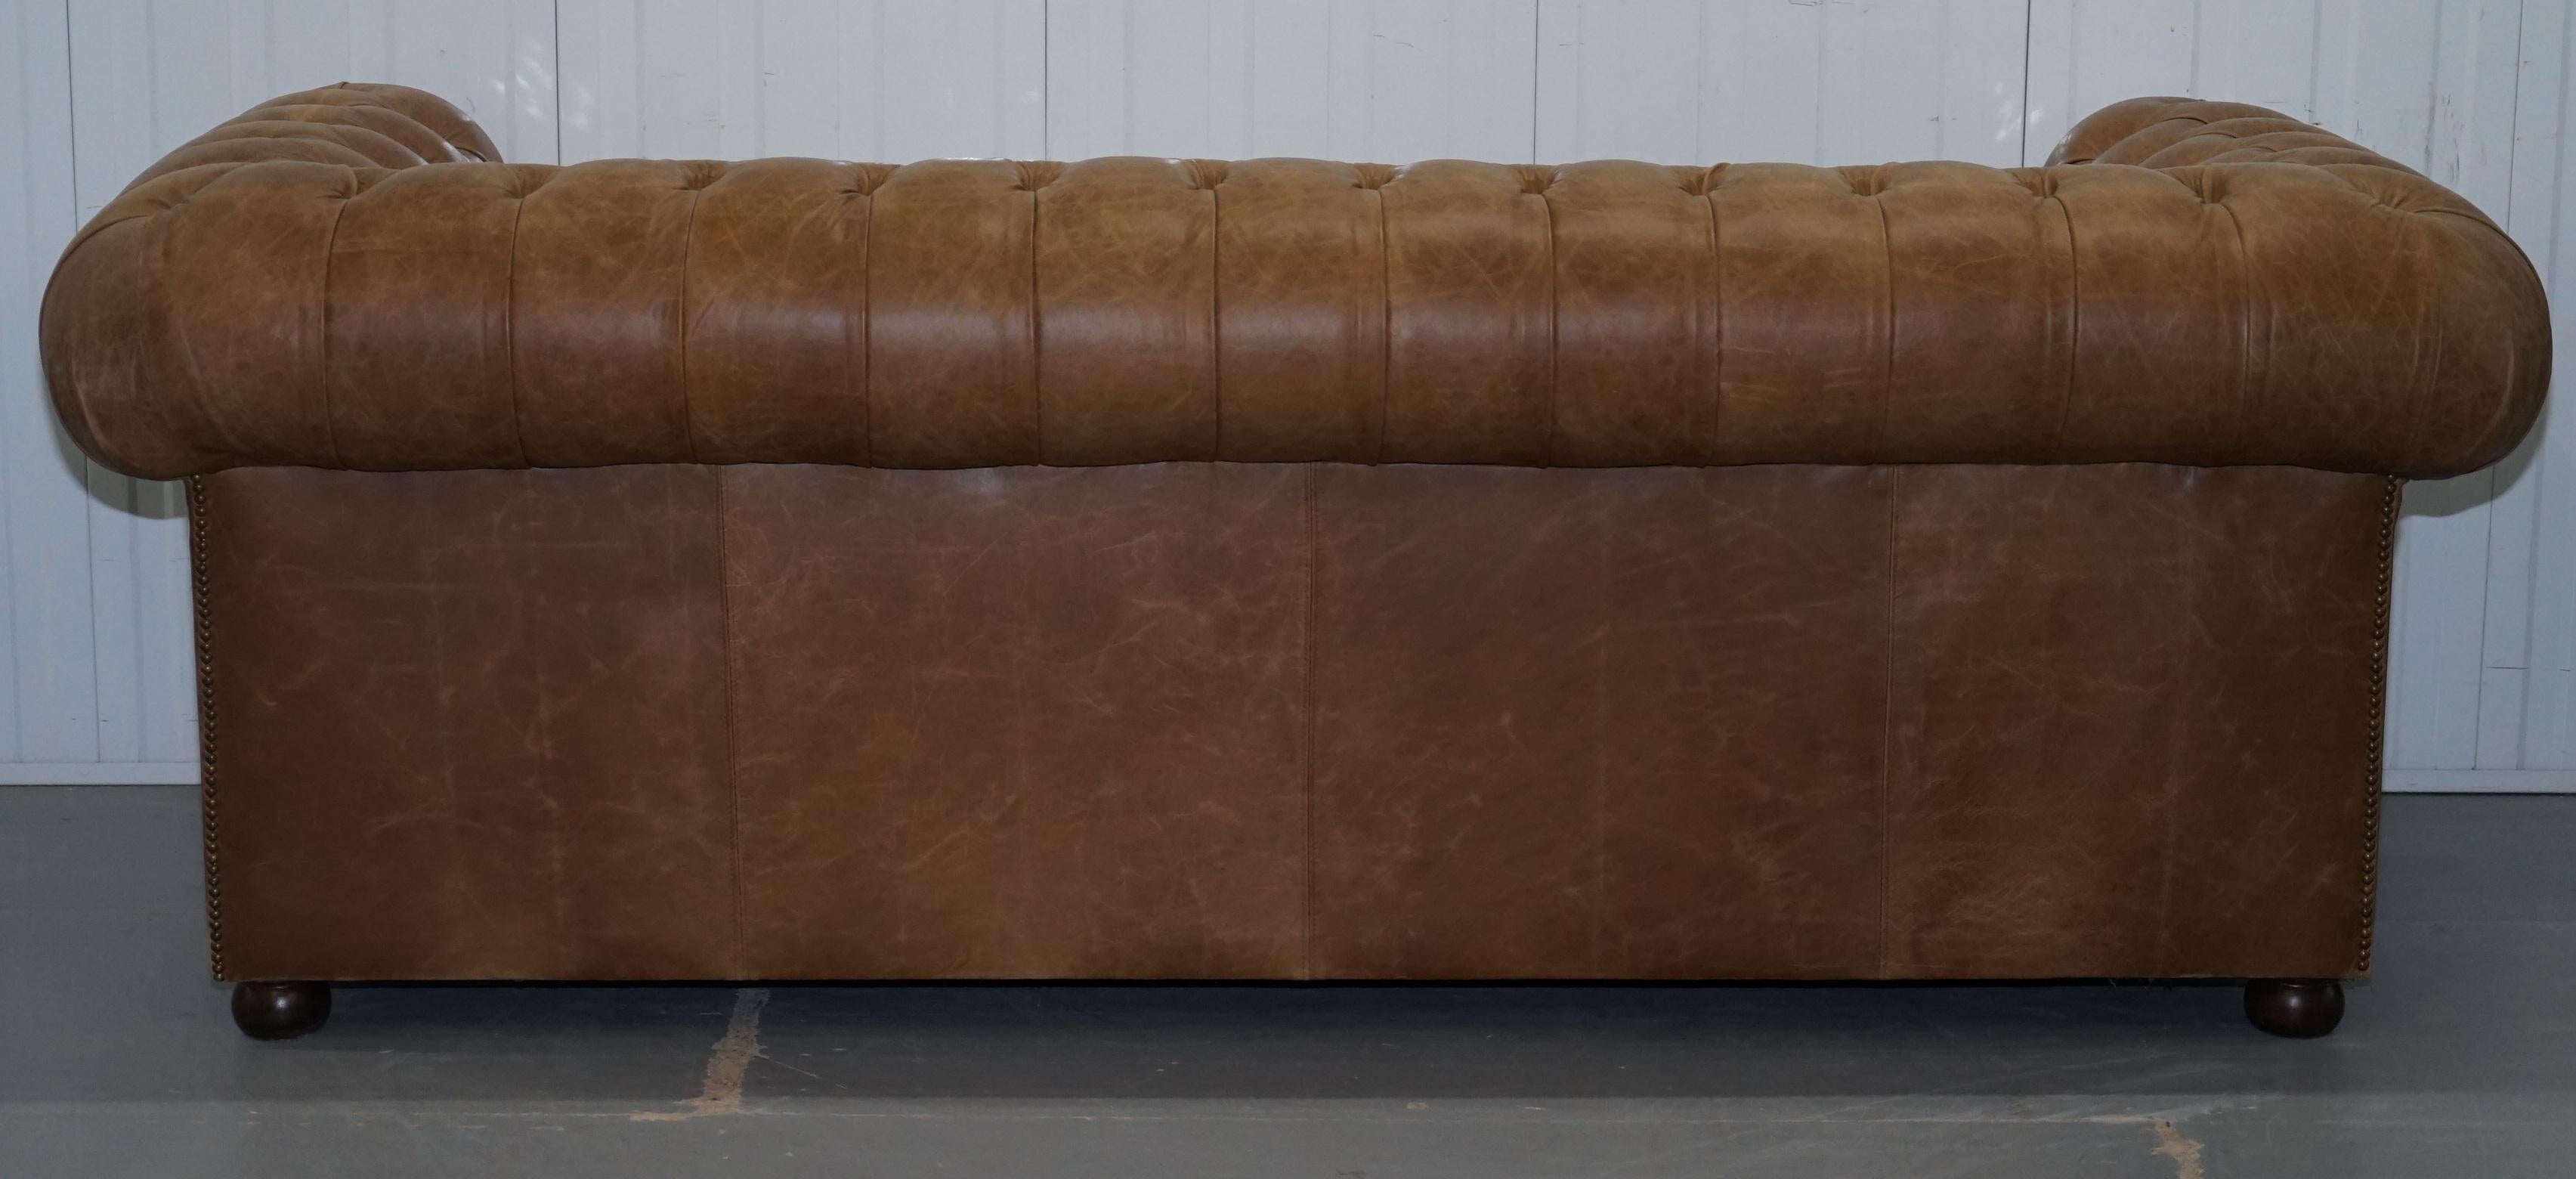 Vintage Heritage Leather Chesterfield Aged Brown Sofabed with Large Double Bed 4